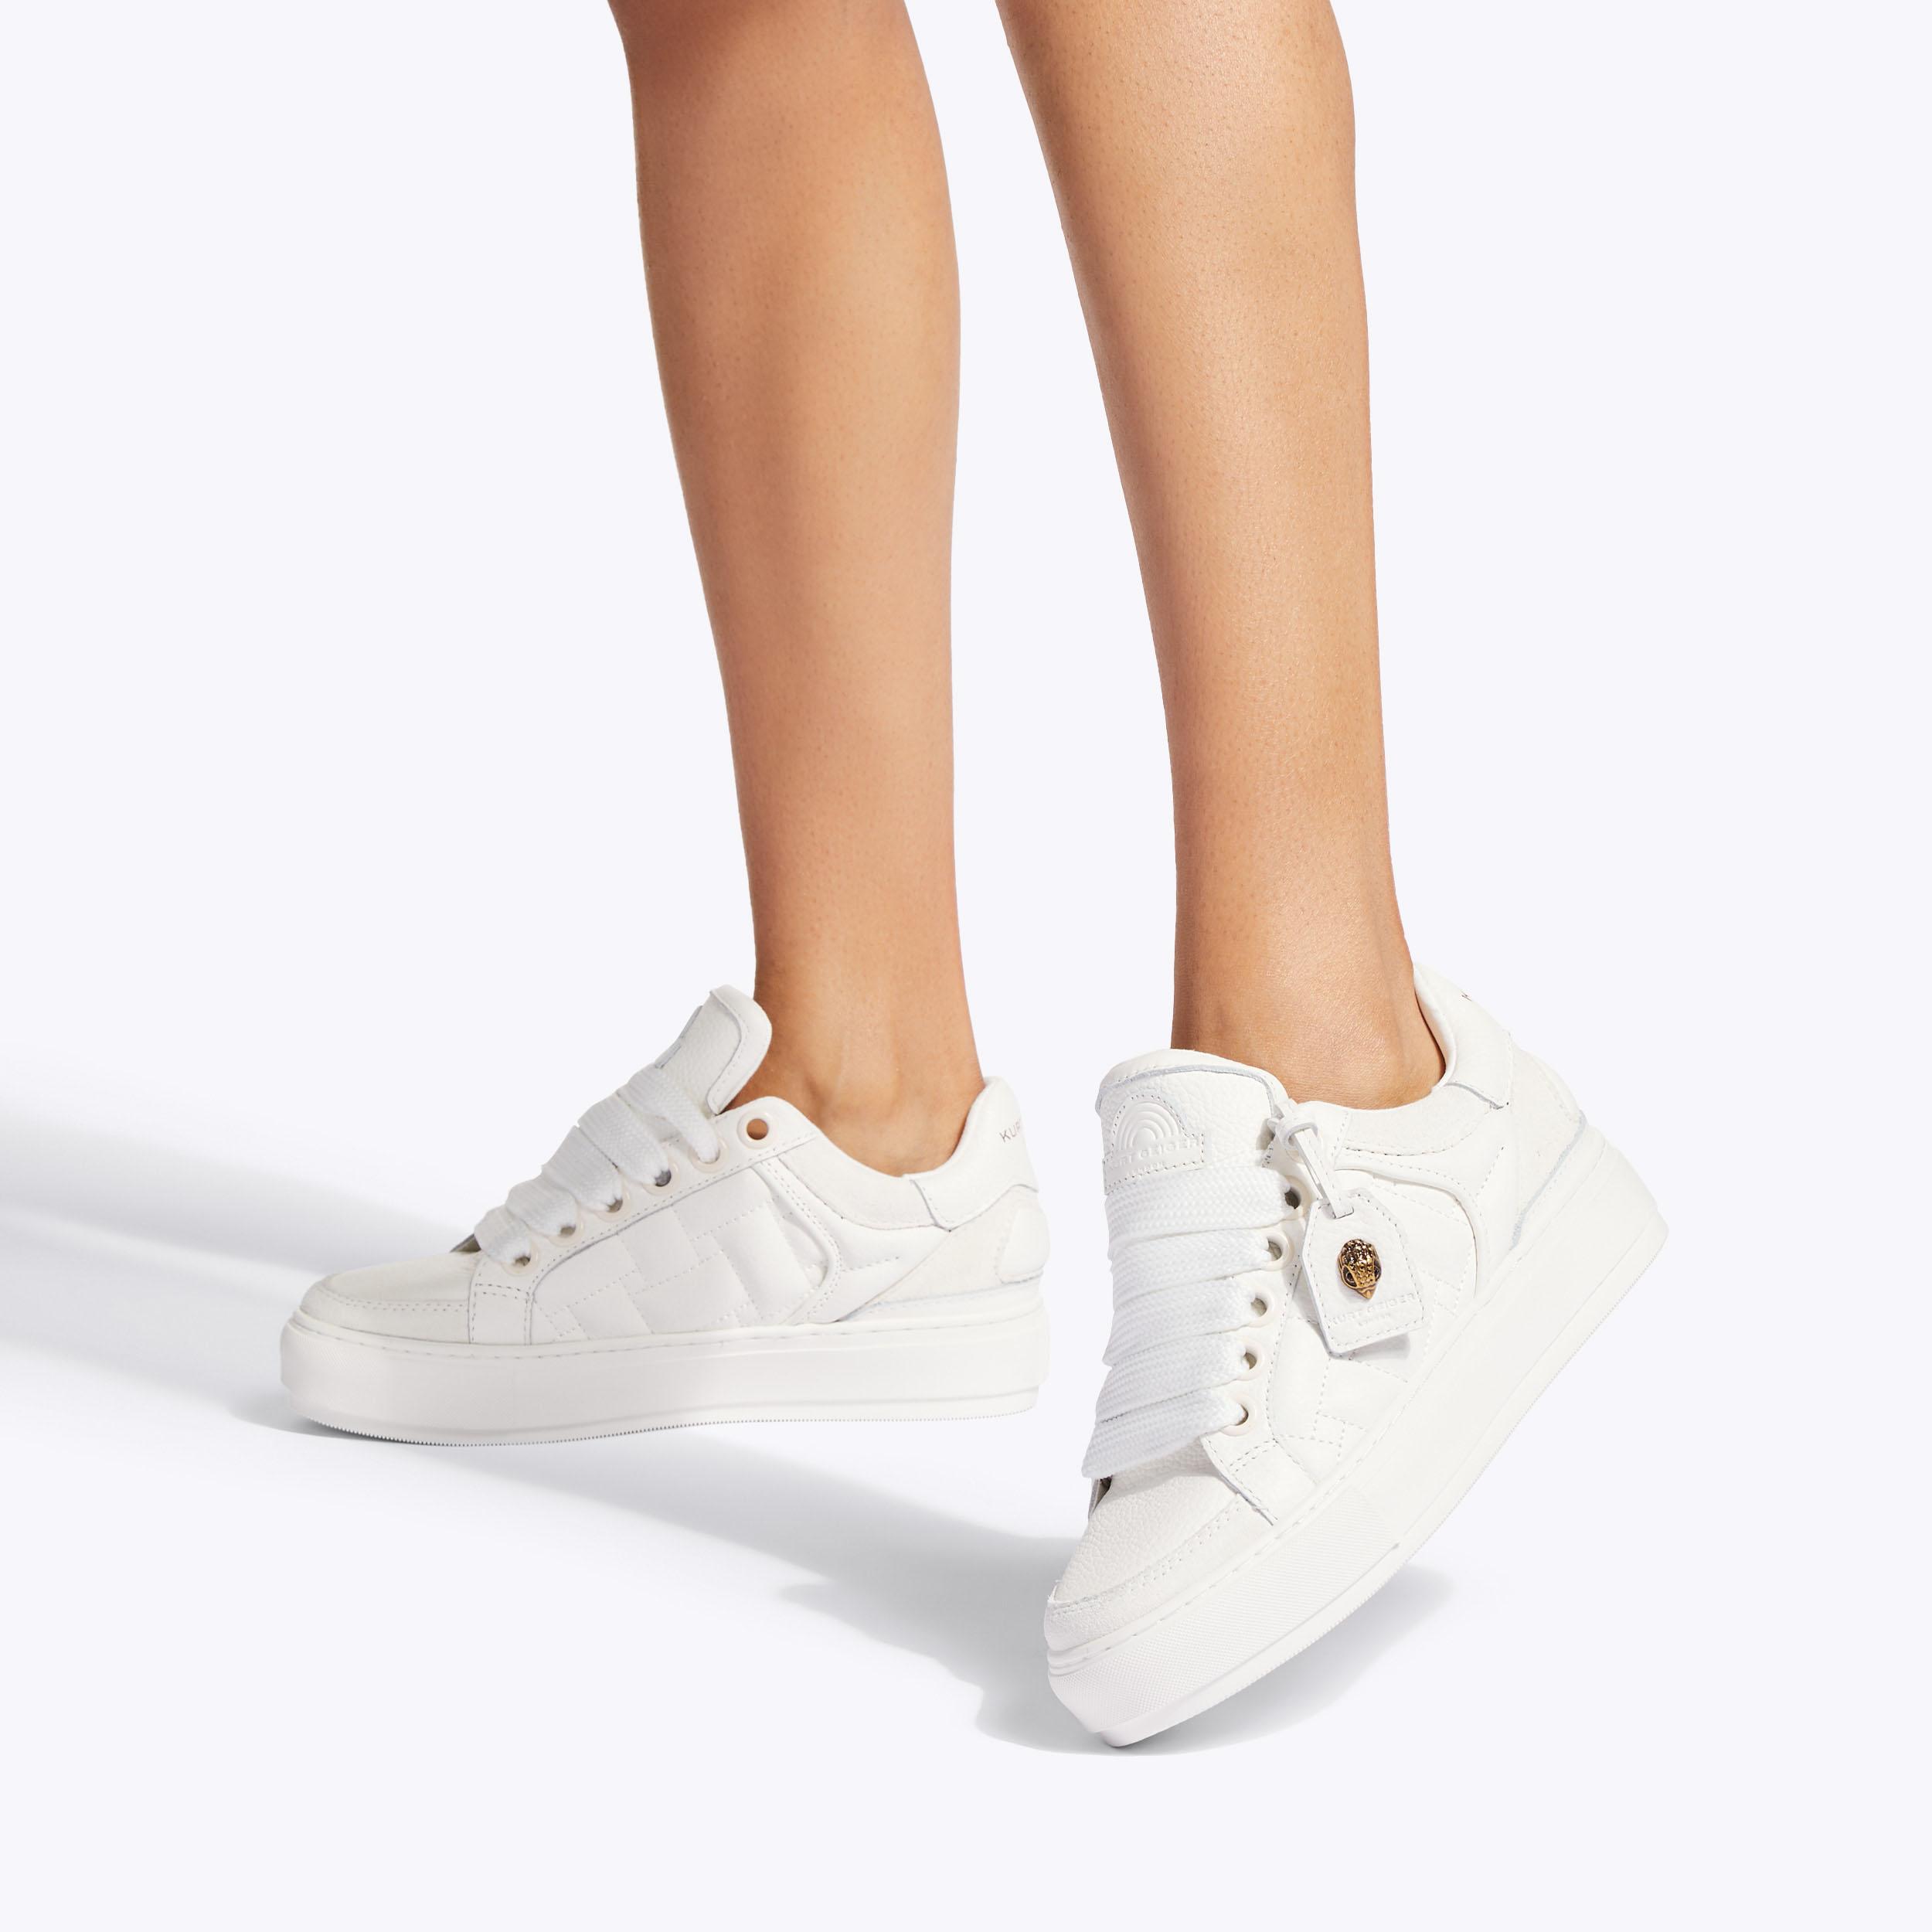 SOUTHBANK White Leather Sneakers by KURT GEIGER LONDON